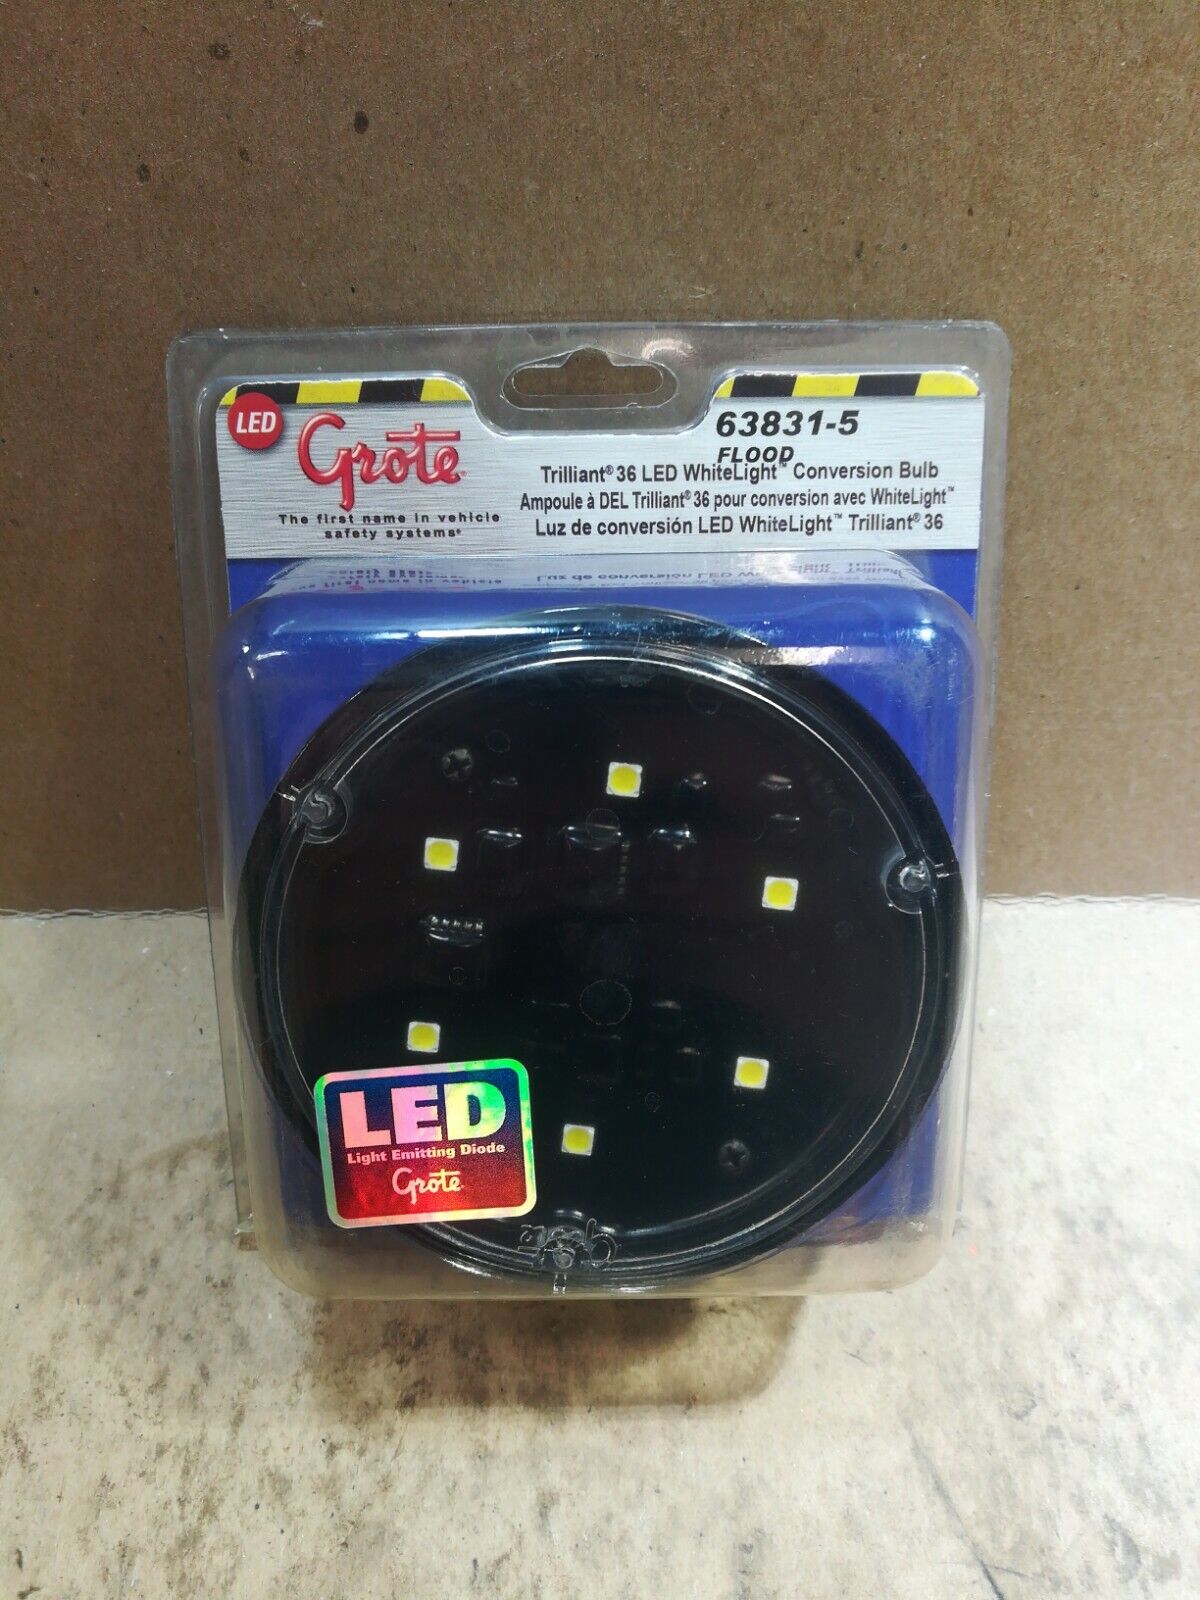 GROTE 63831-5 LED LIGHT - 800 LUMENS - NEW GENUINE - FAST SAME DAY SHIPPING